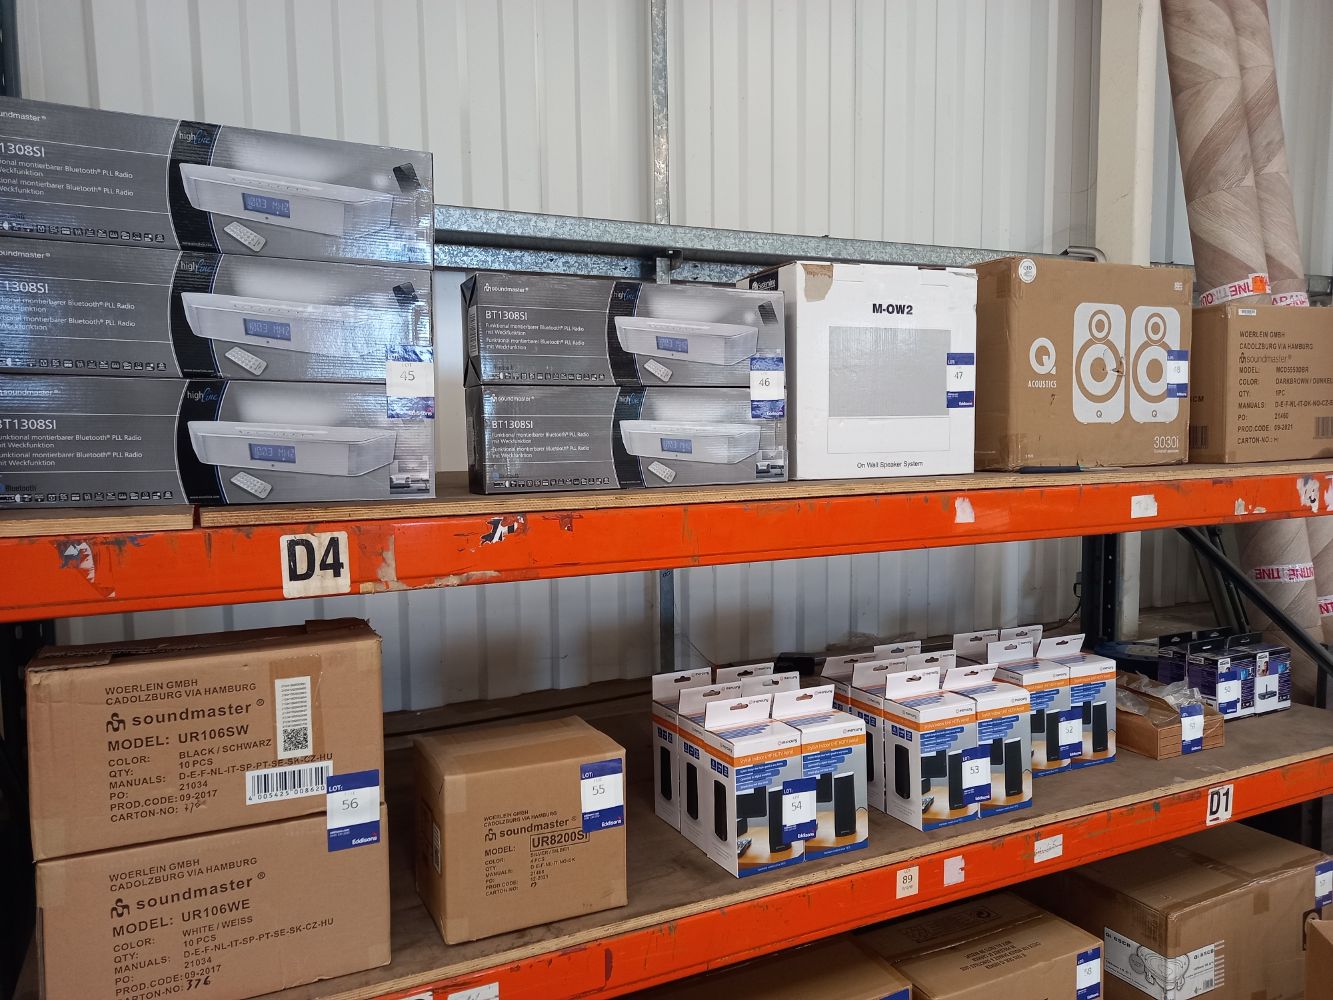 AV Stock, Hi-Fi Units, DAB Radios, Speakers, Cables, Connectors and Photographic Equipment